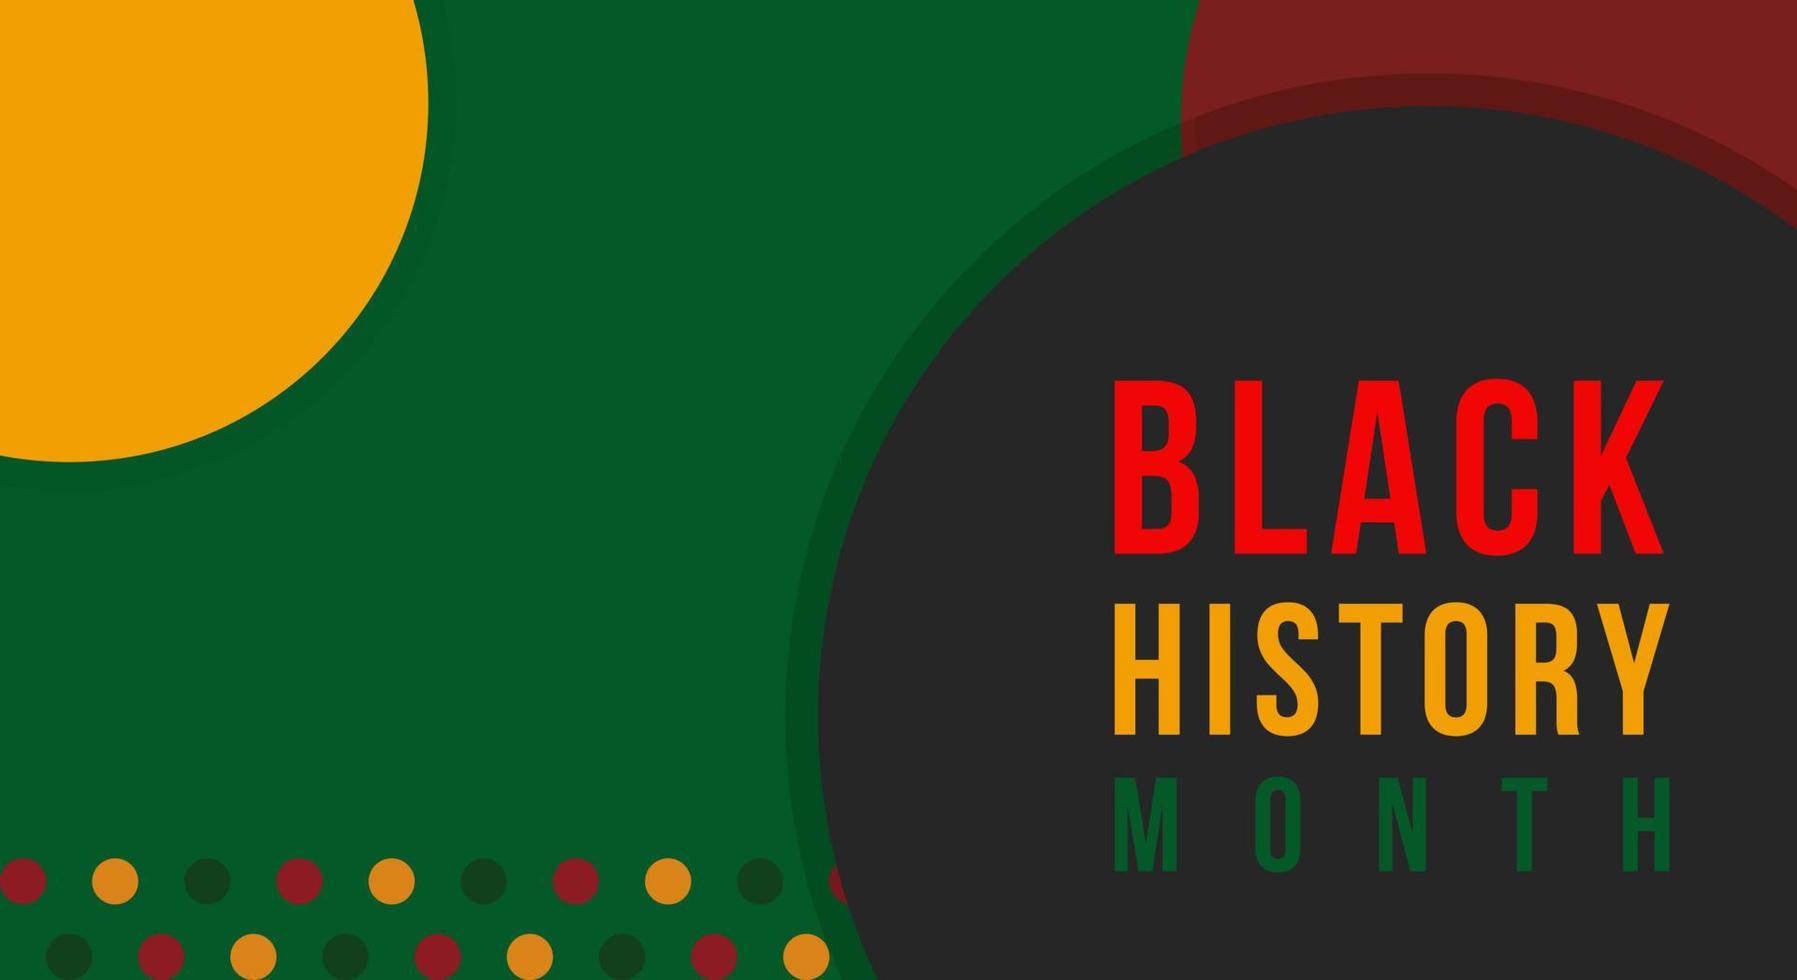 Black History Month background. African American History is celebrated annually in February. vector